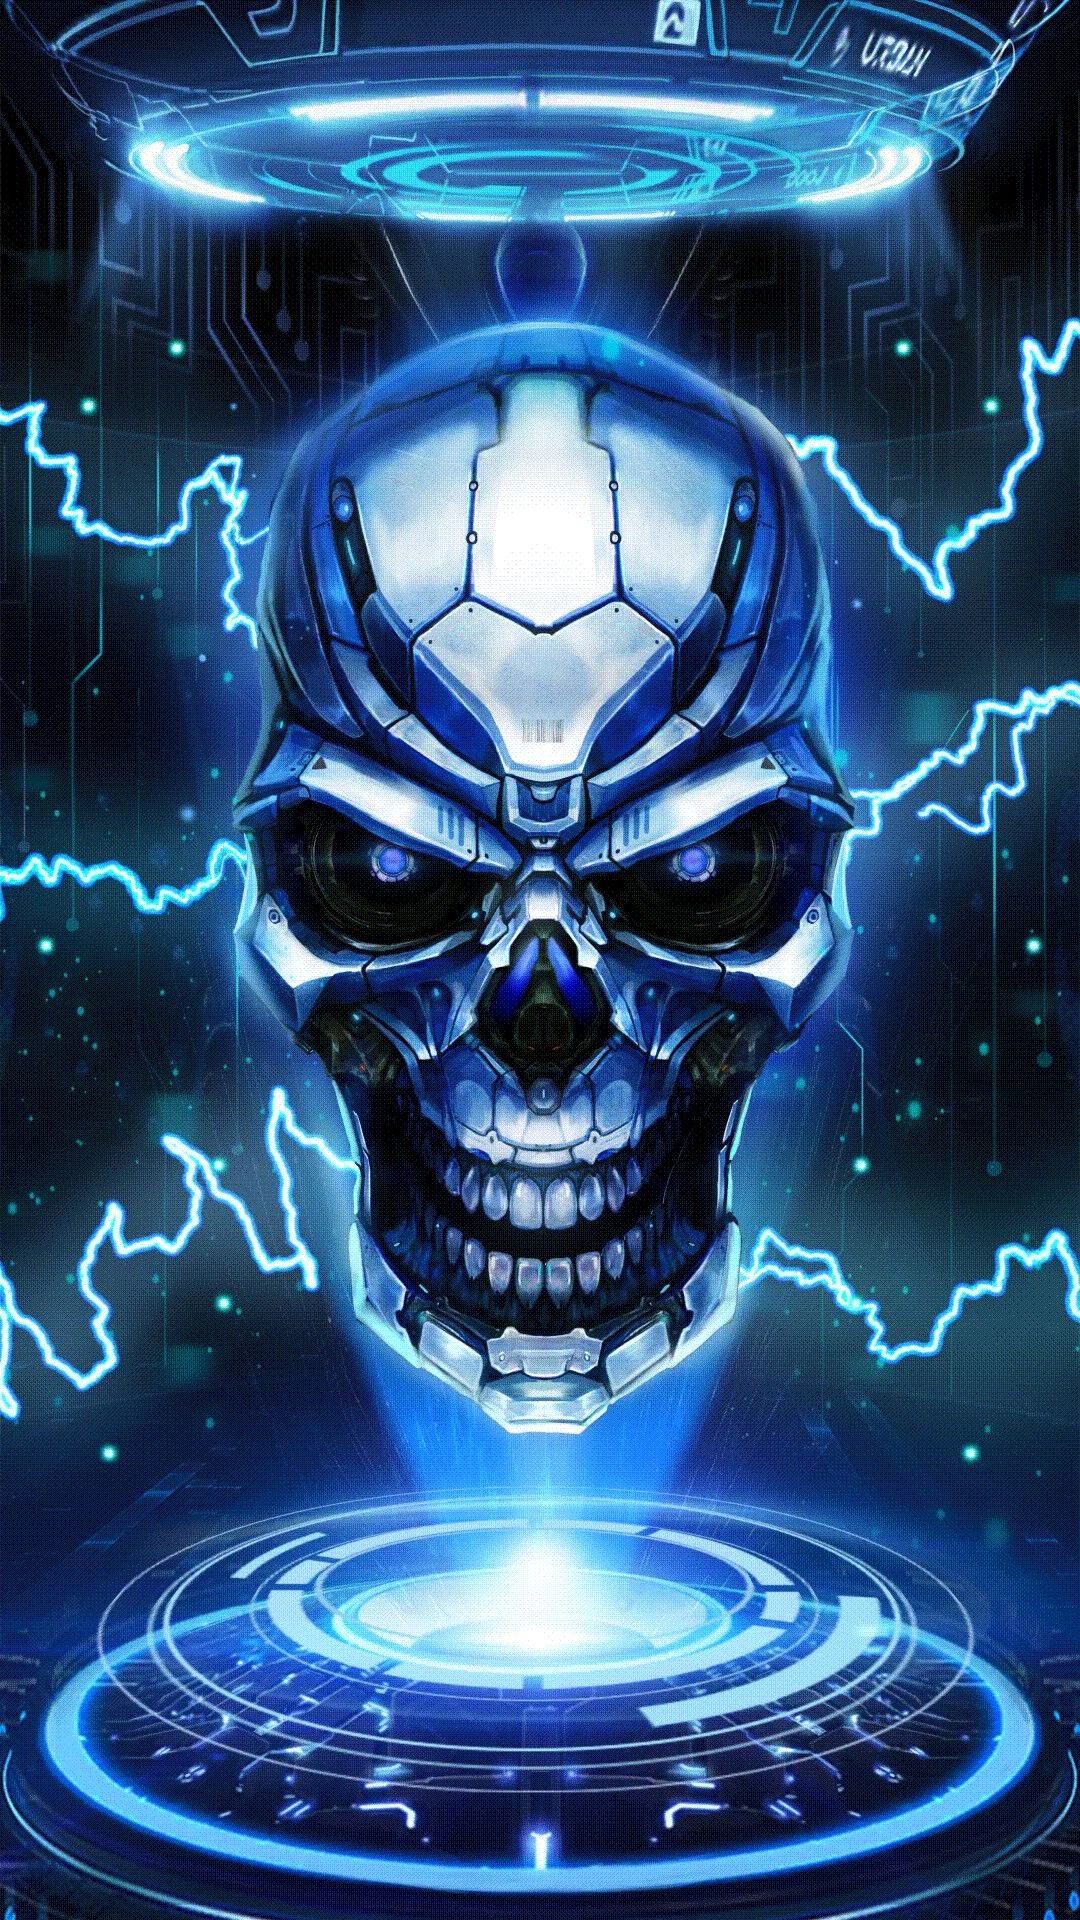 New Cool Skull Live Wallpaper Android Wallpaper From Fire